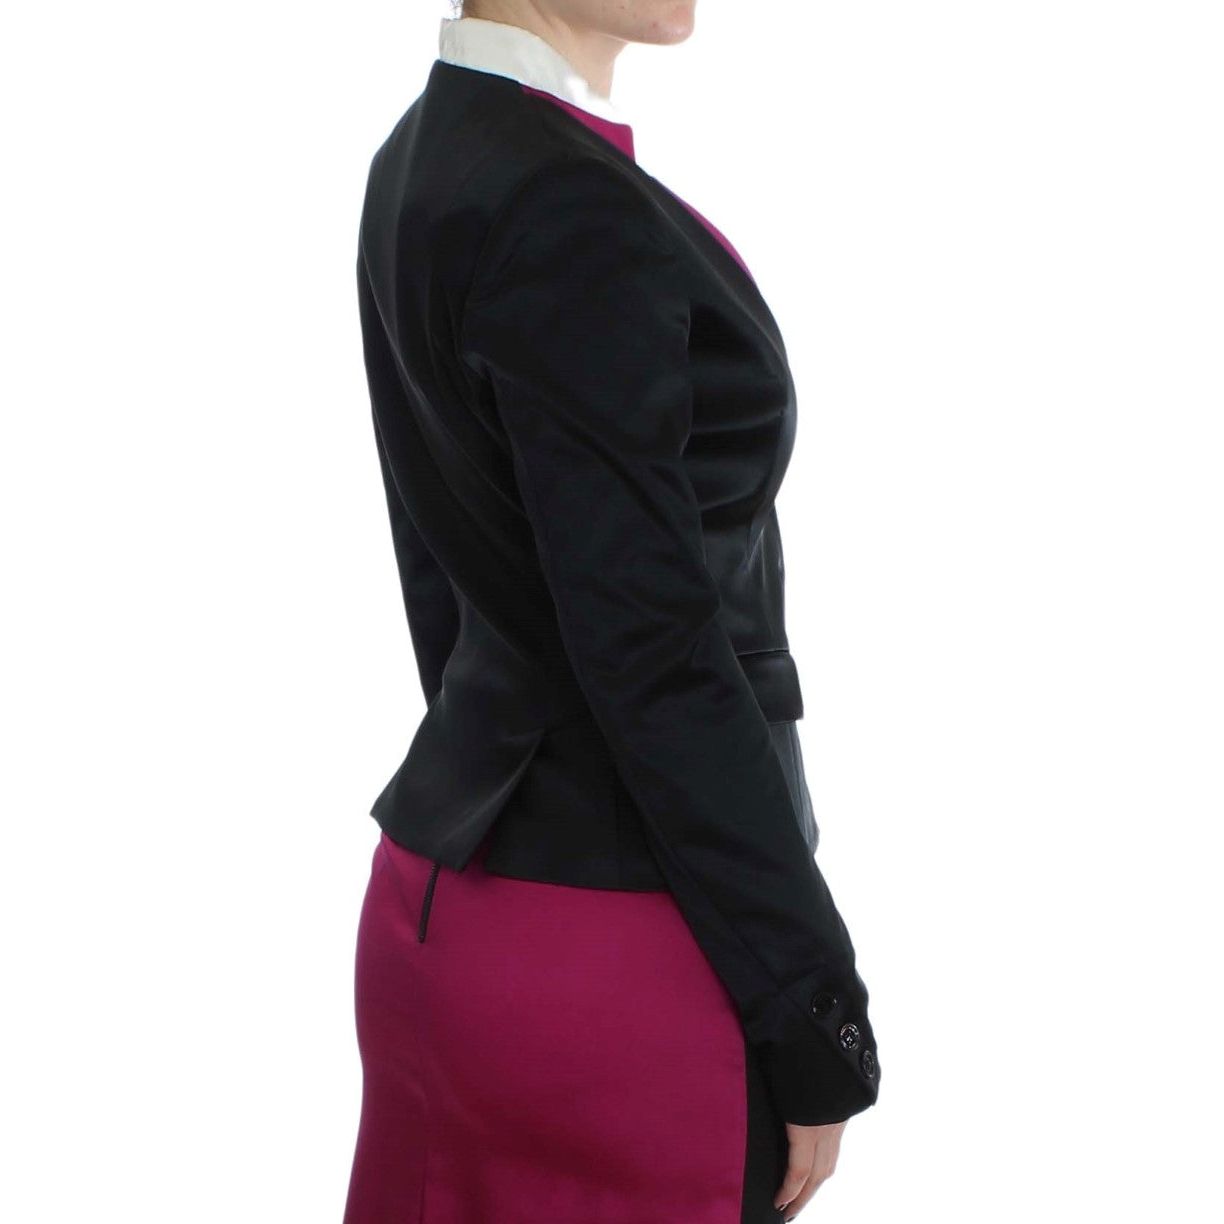 Exte Chic Black and Pink Single-Breasted Blazer Blazer Jacket black-pink-stretch-blazer-jacket